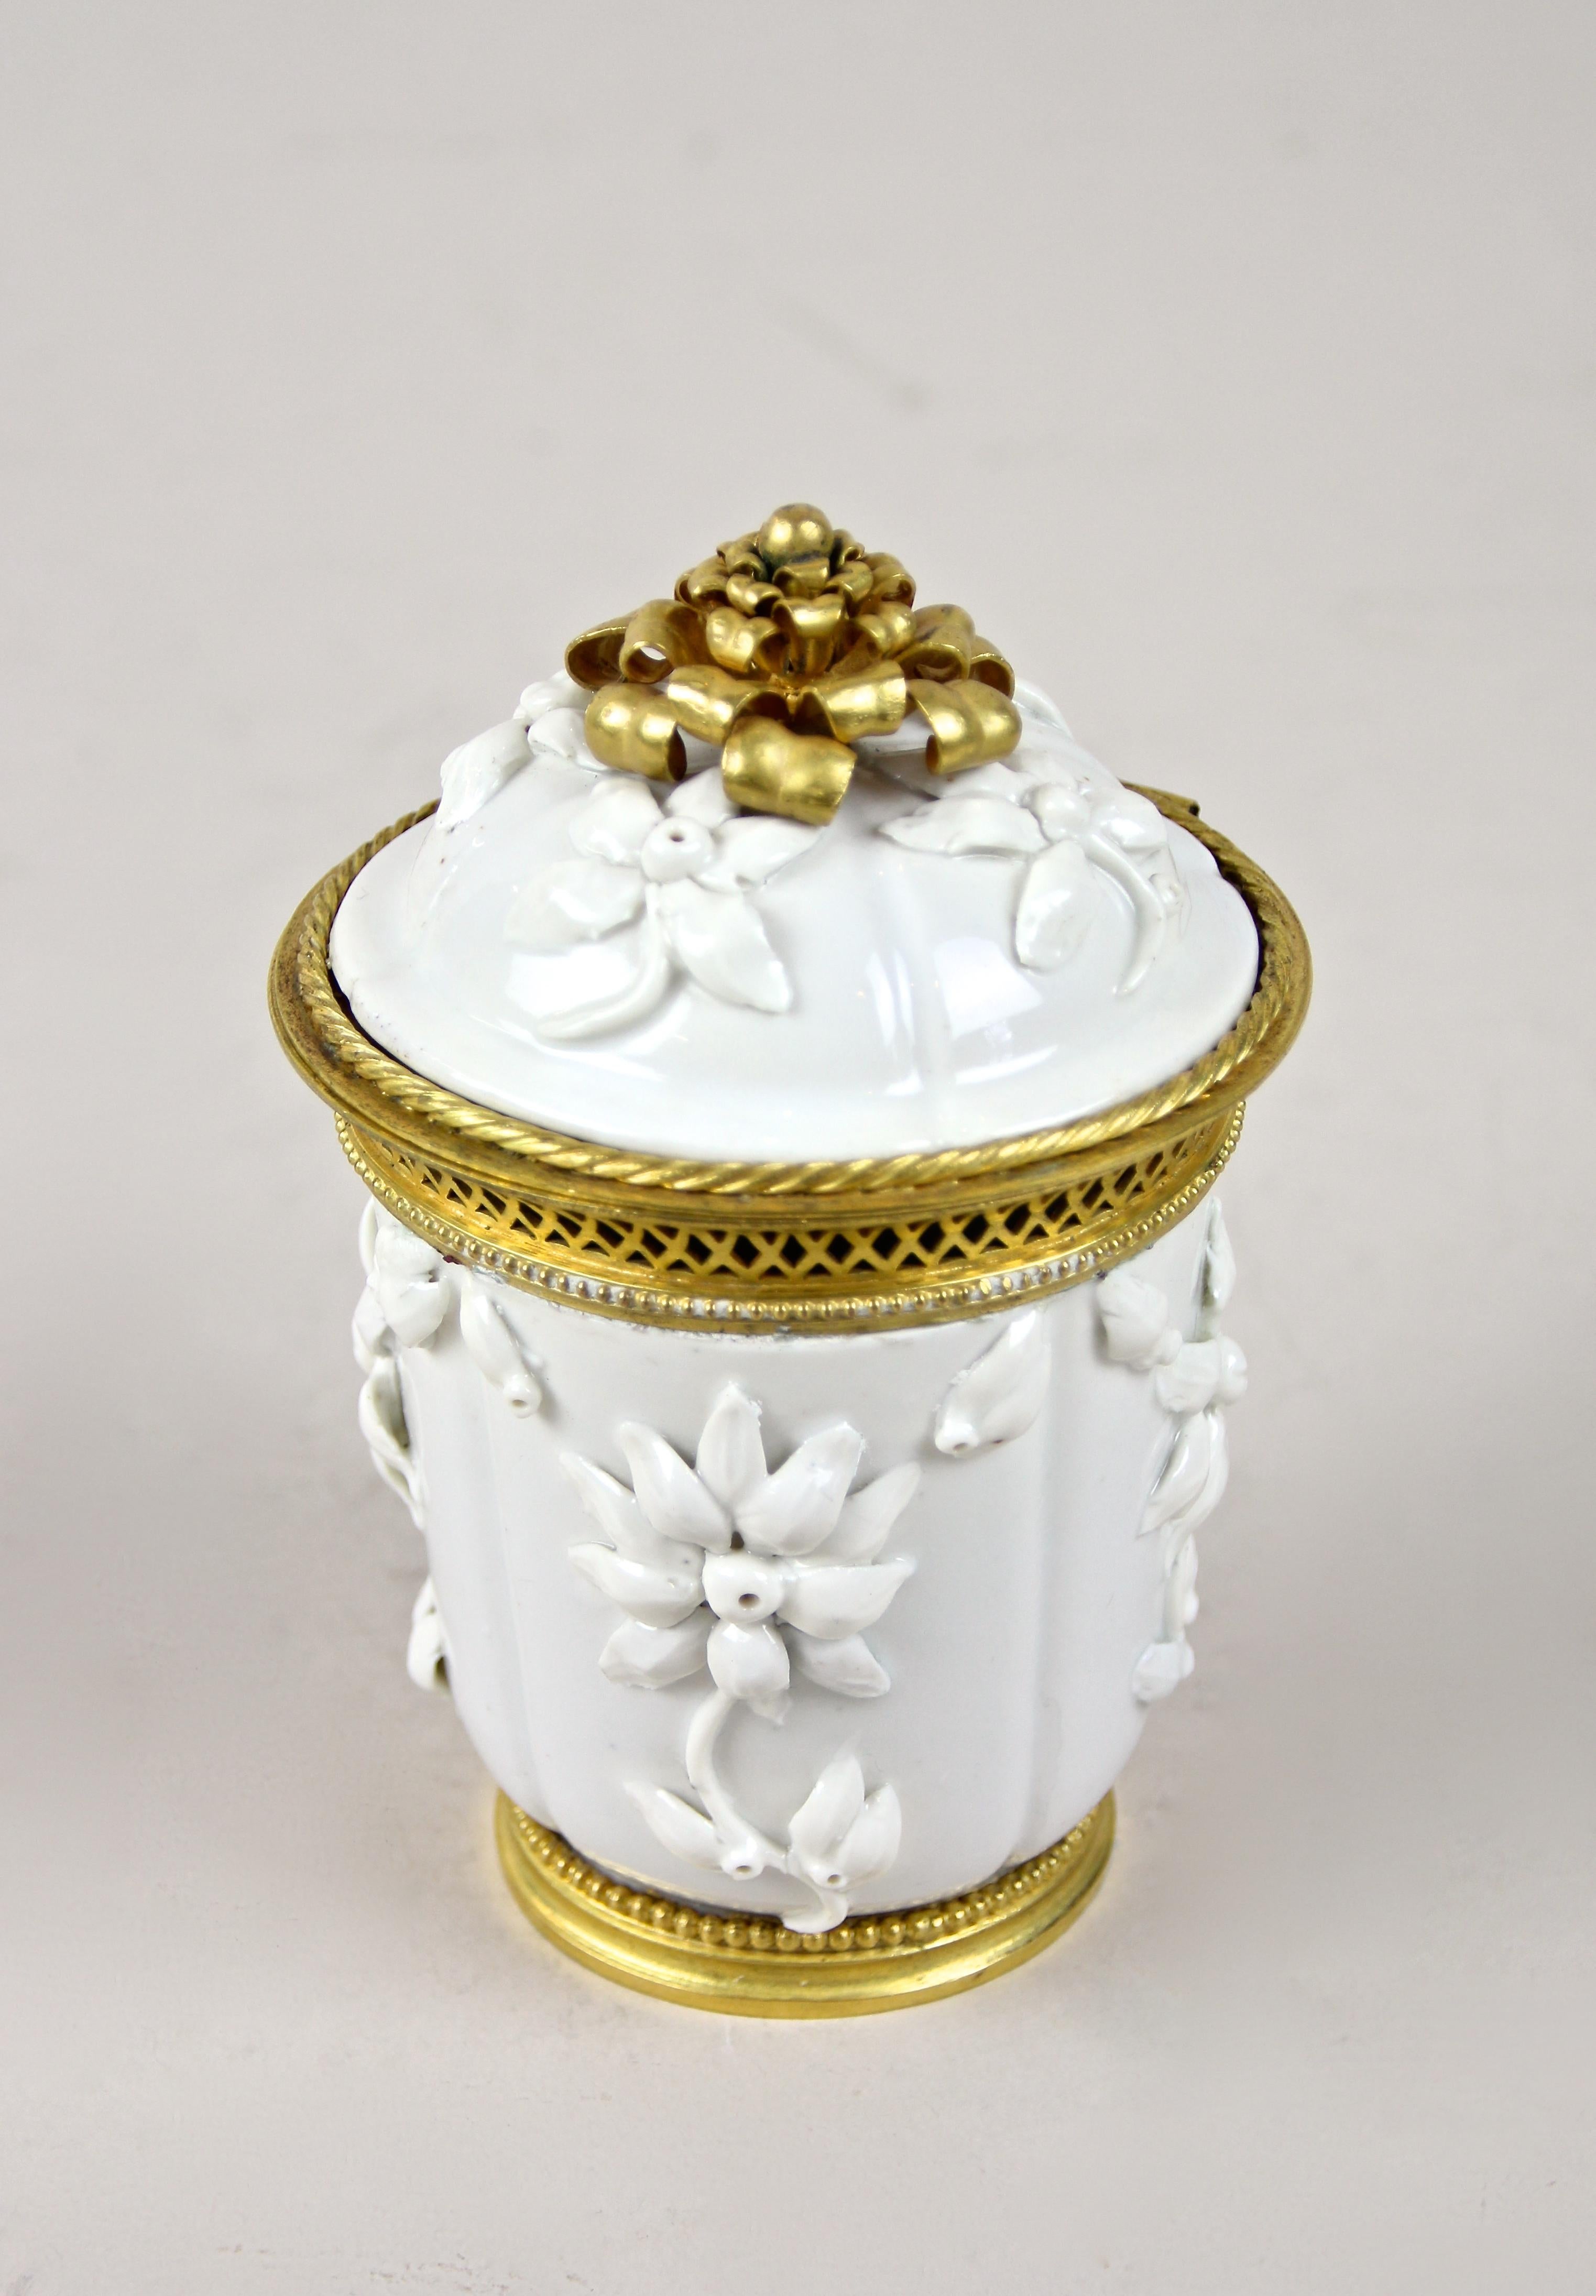 Extraordinary 18th century porcelain jar by Saint Cloud out of France. Artfully processed, circa 1730, this rare porcelain jar with hinged lid and firegilt elements was designed as a noble Potpourri box. Finely scented petals were filled in and